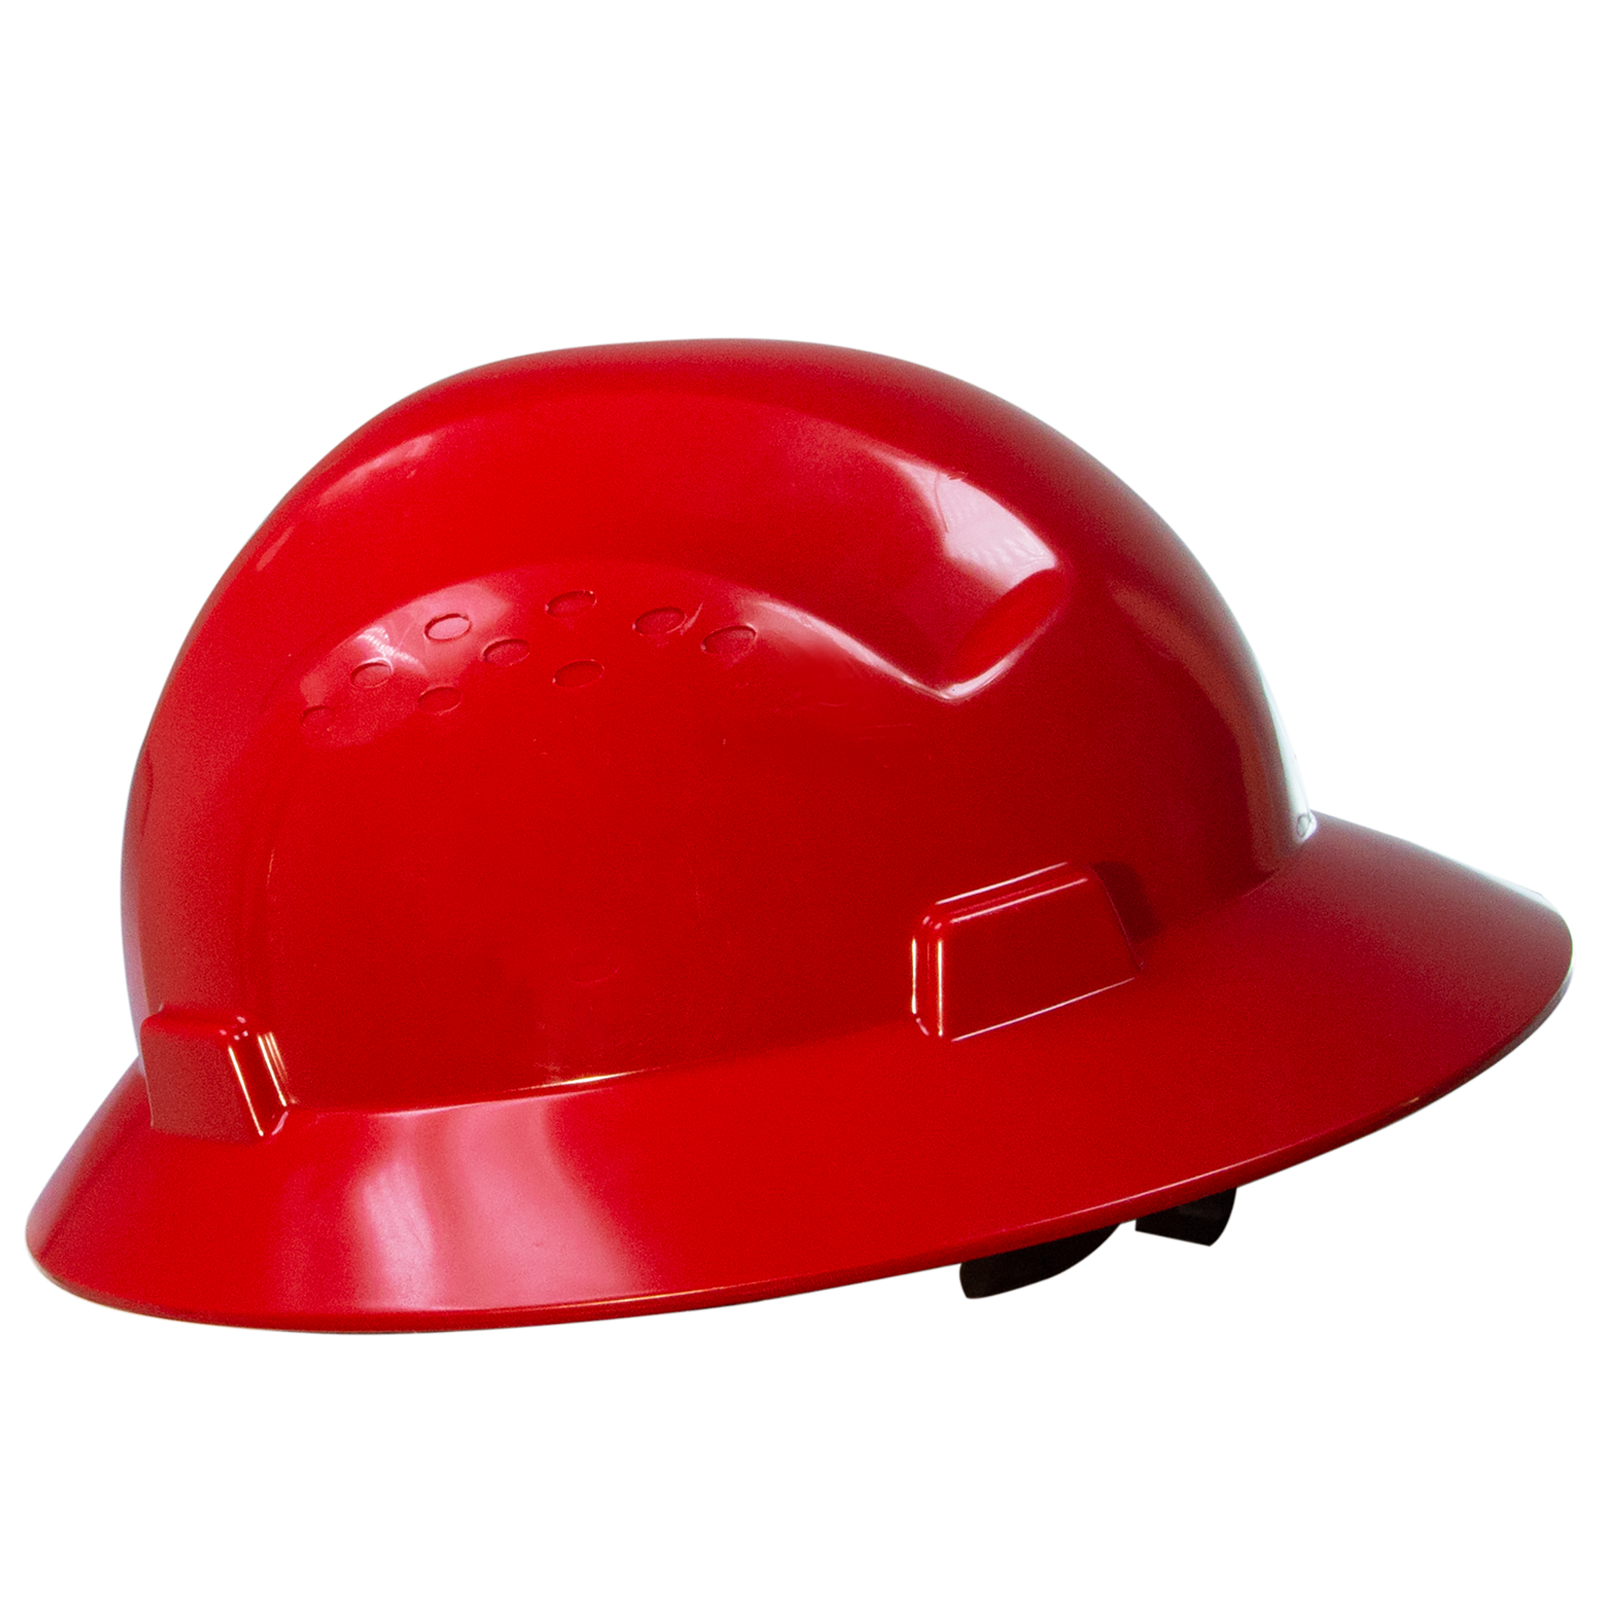 A JORESTECH full brim red safety hard hat with 4 point suspension Type I Class C, E, G